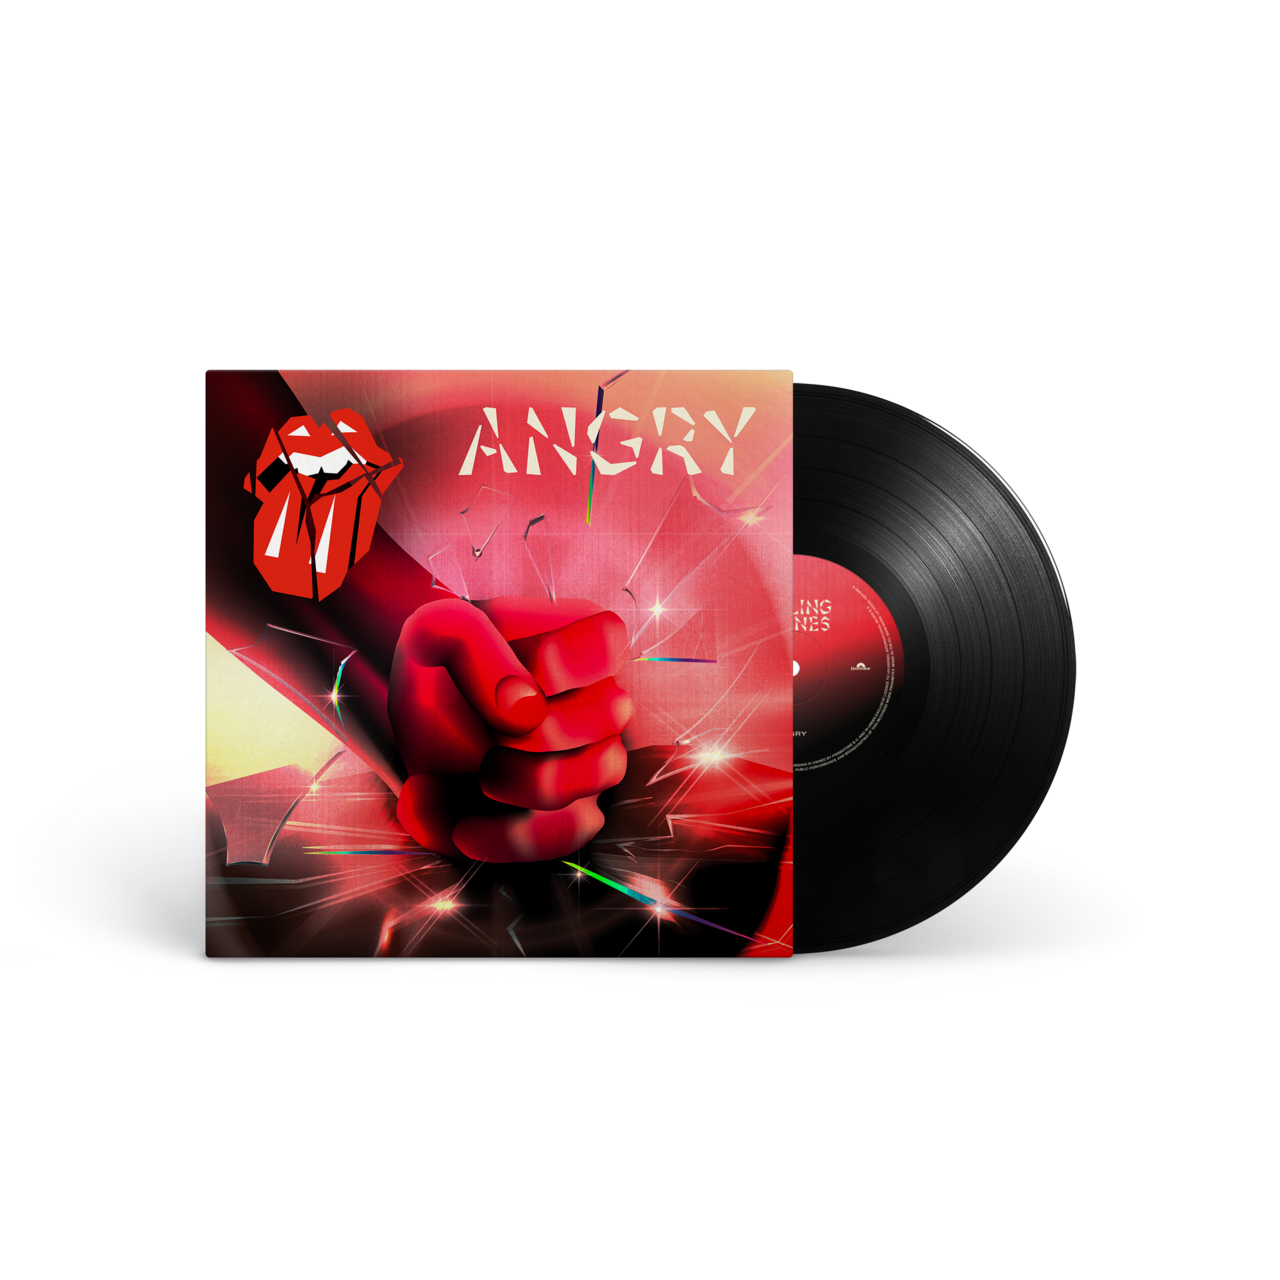 The Rolling Stones - Angry 10" Single